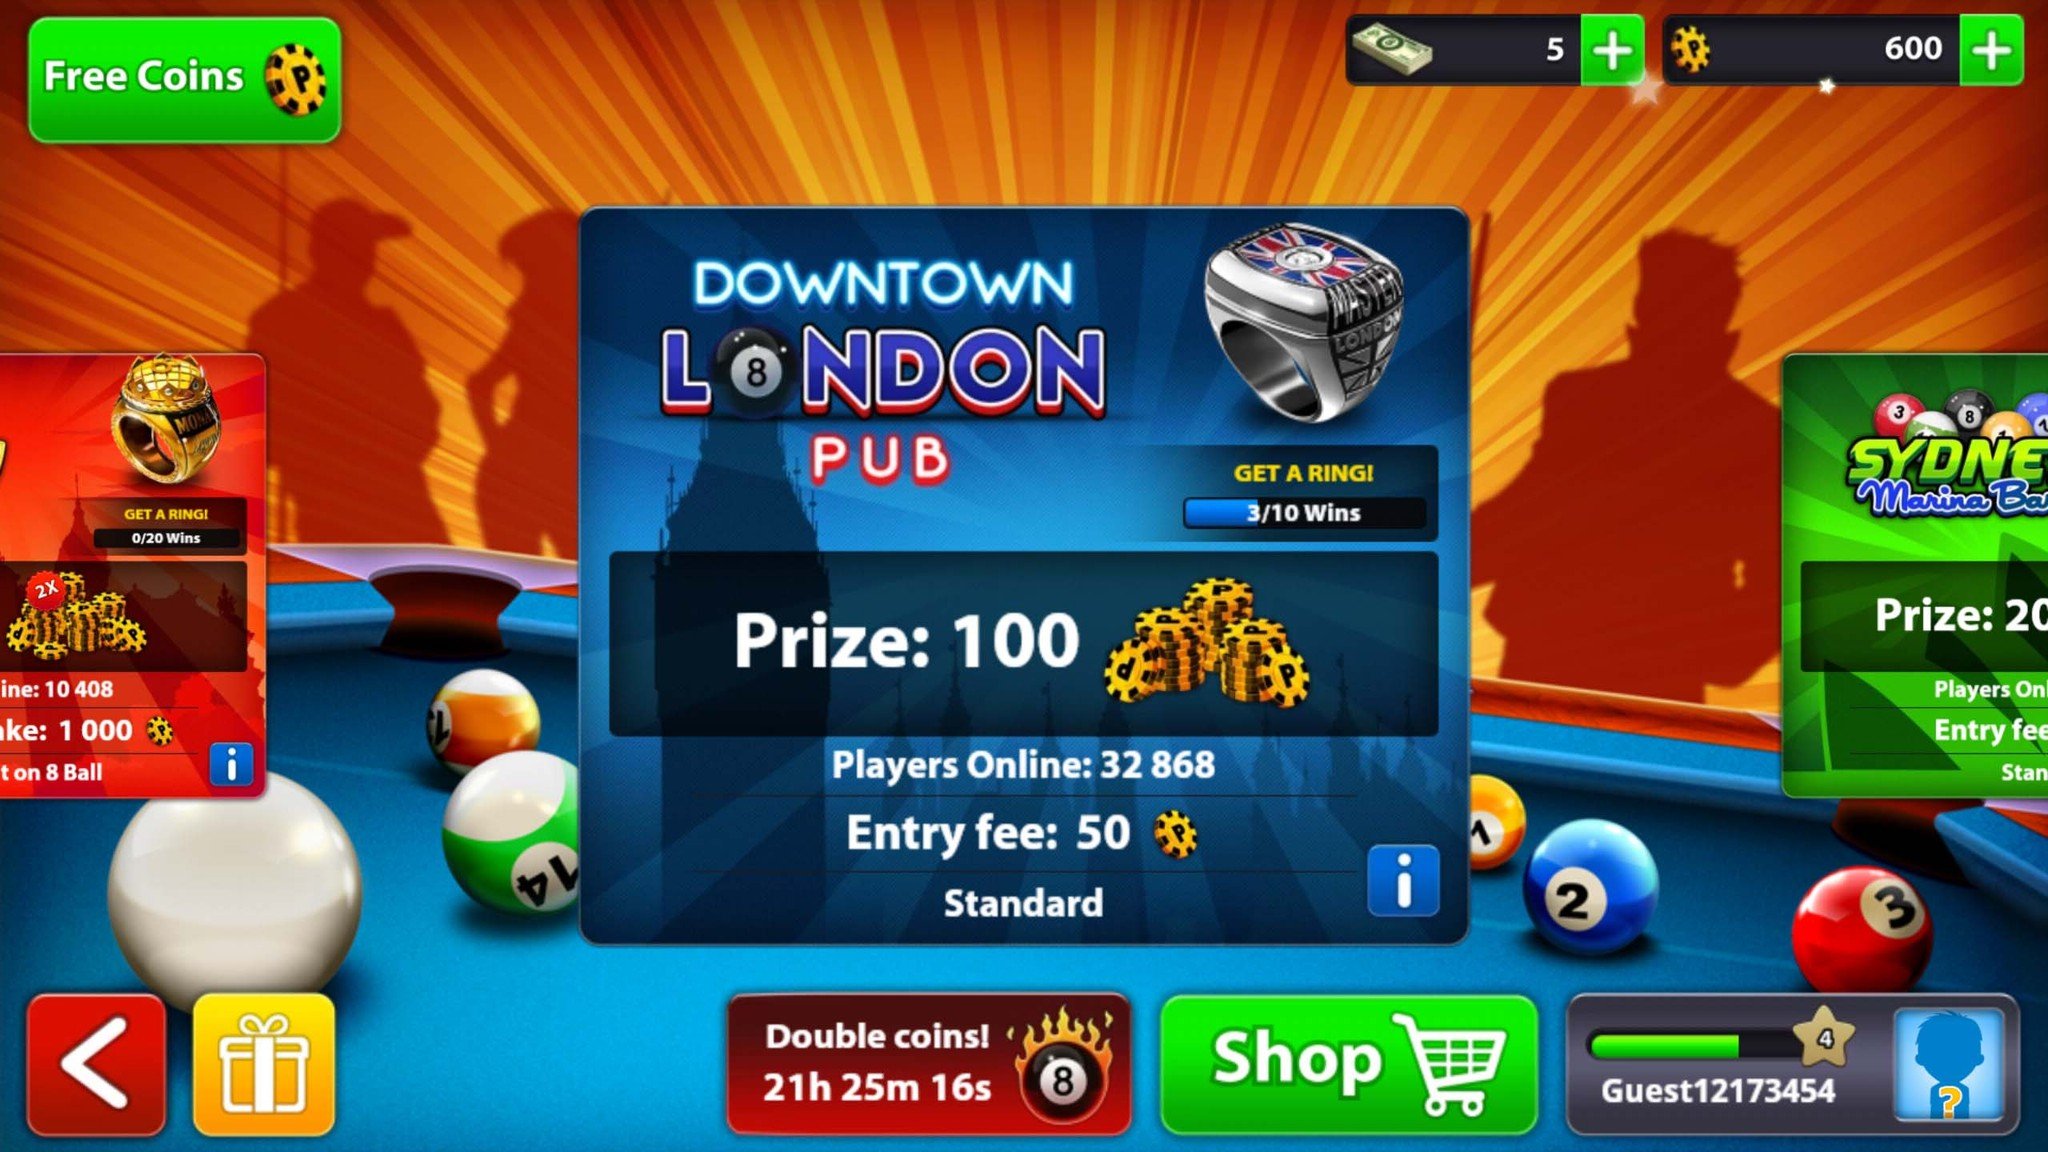 8 Ball Pool Six Tips Tricks And Cheats For Beginners Imore